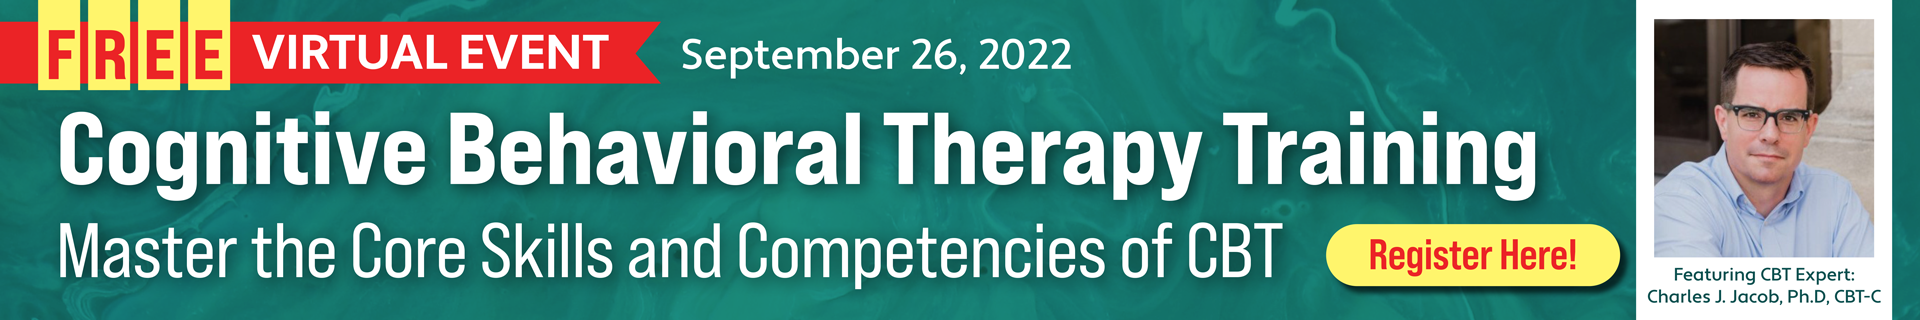 Cognitive Behavioral Therapy Training: Master the Core Skills and Competencies of CBT